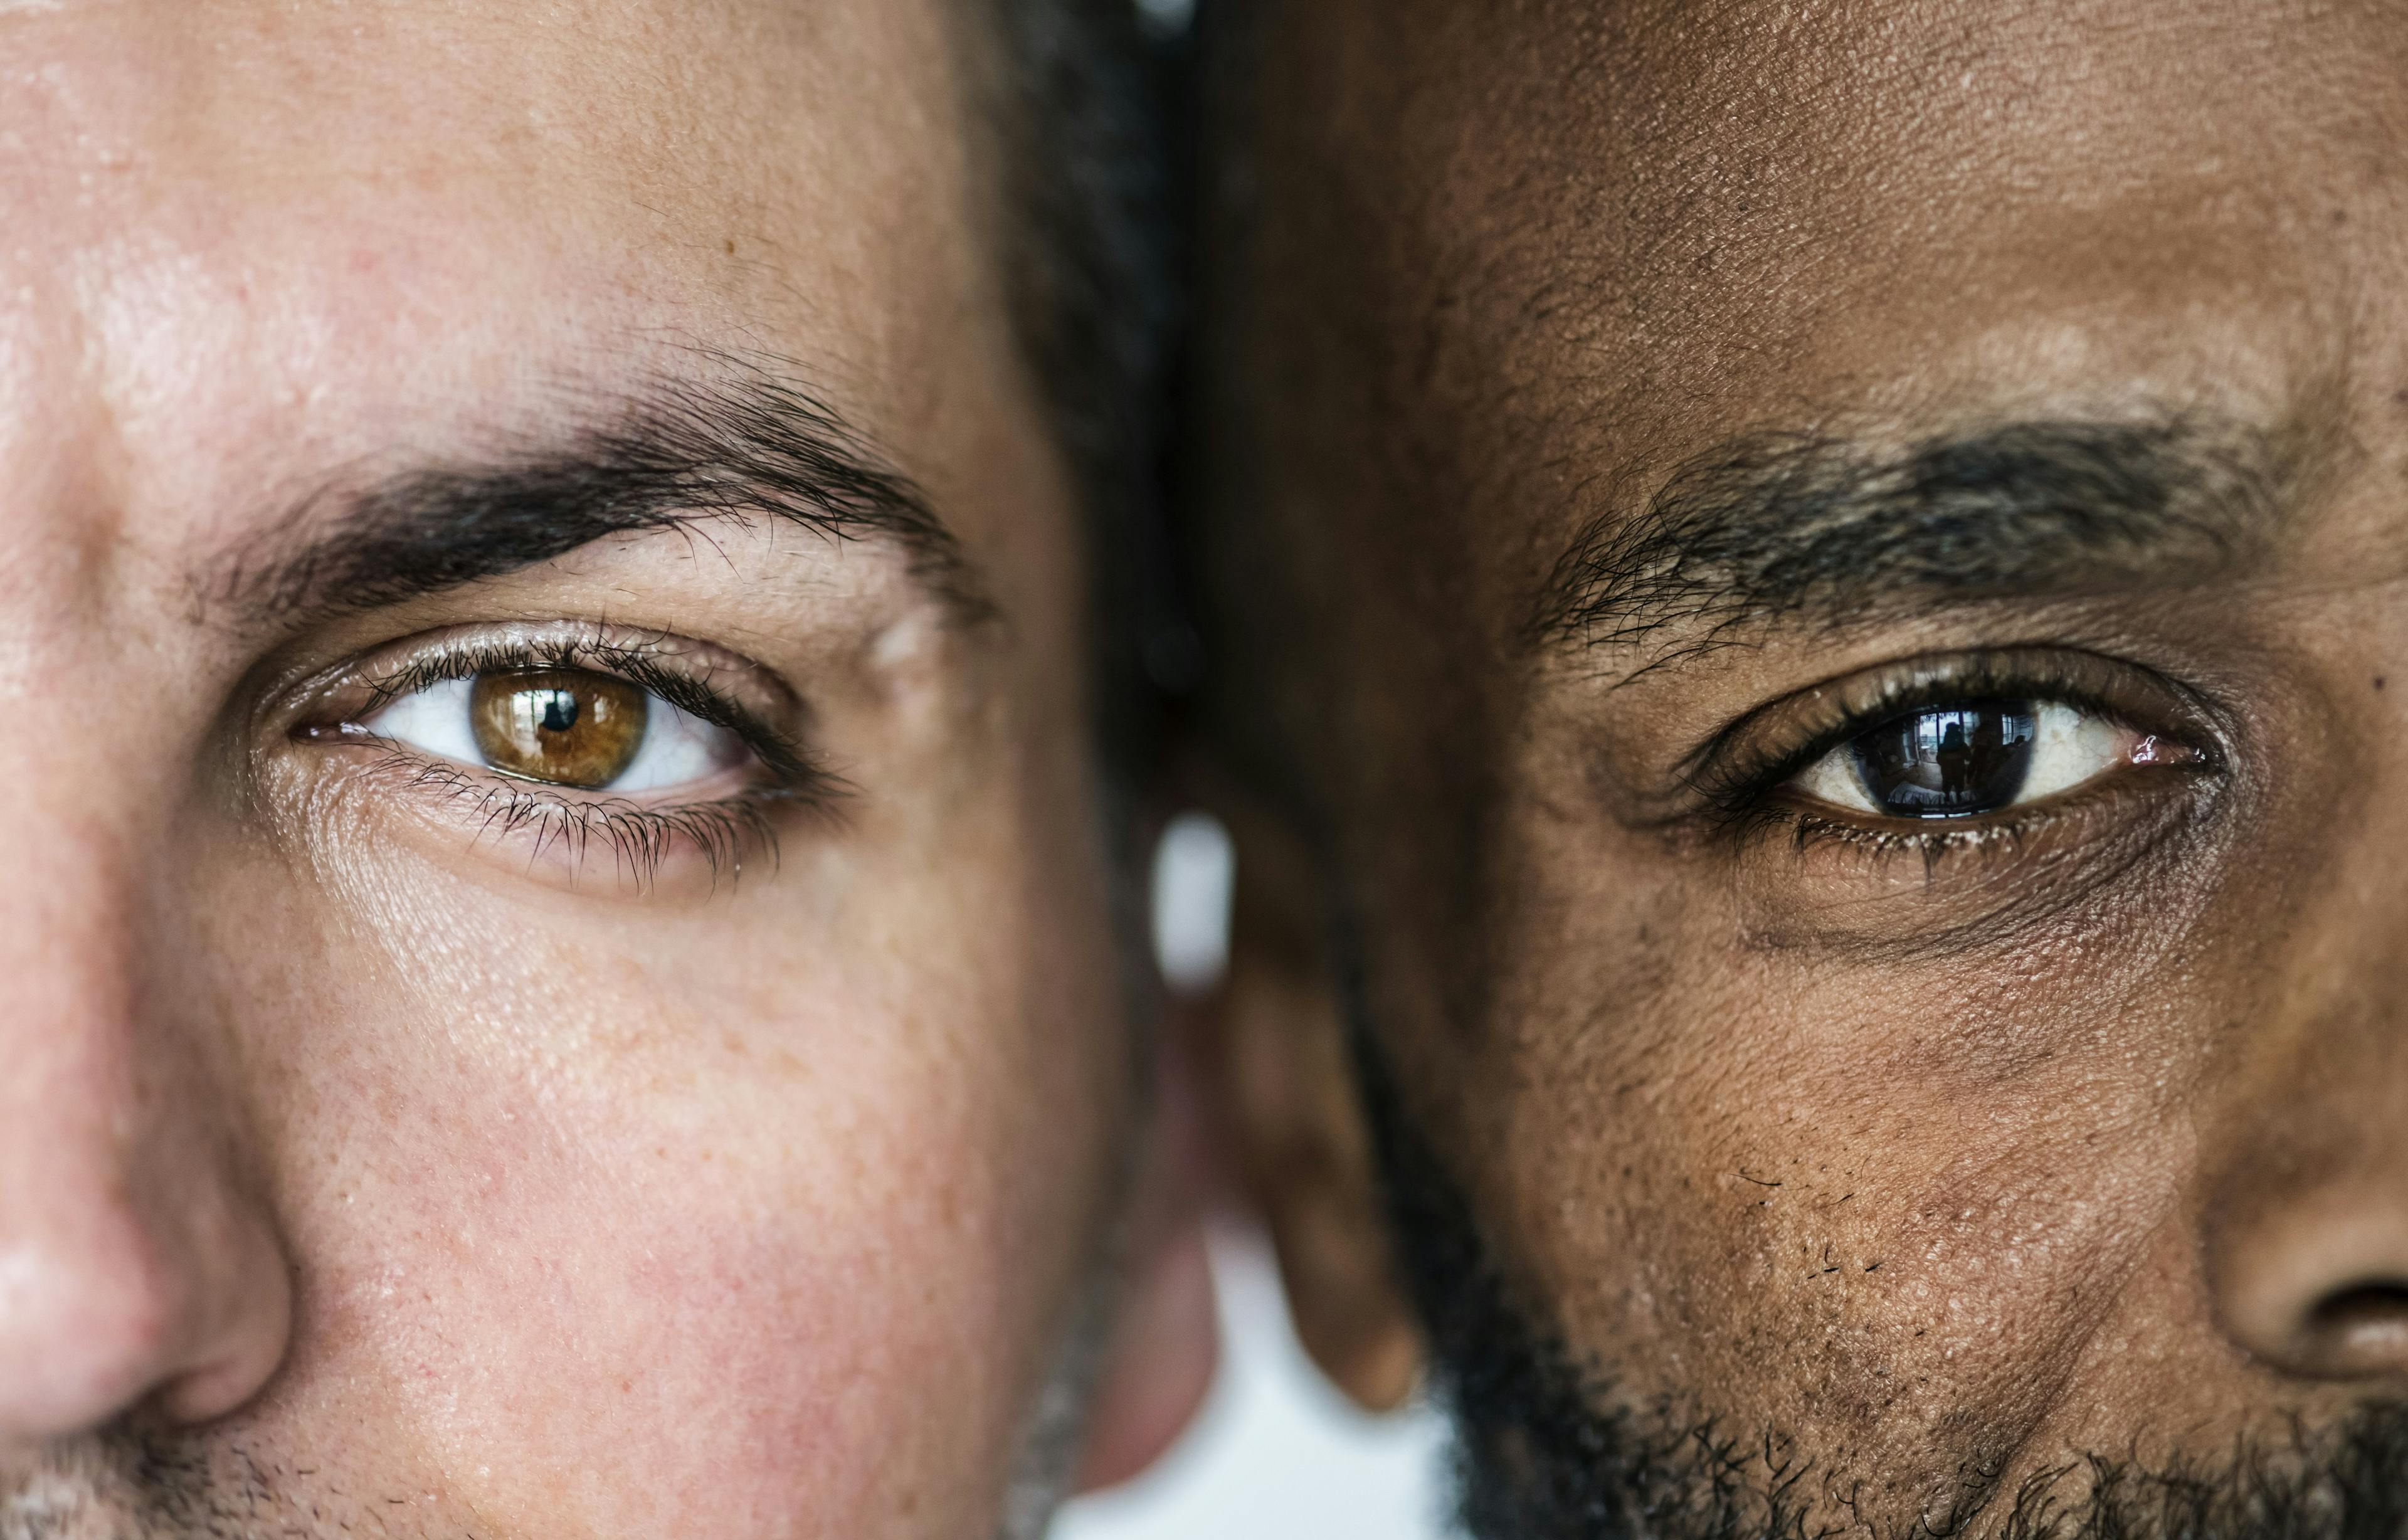 Study Finds Racial Differences in HCM